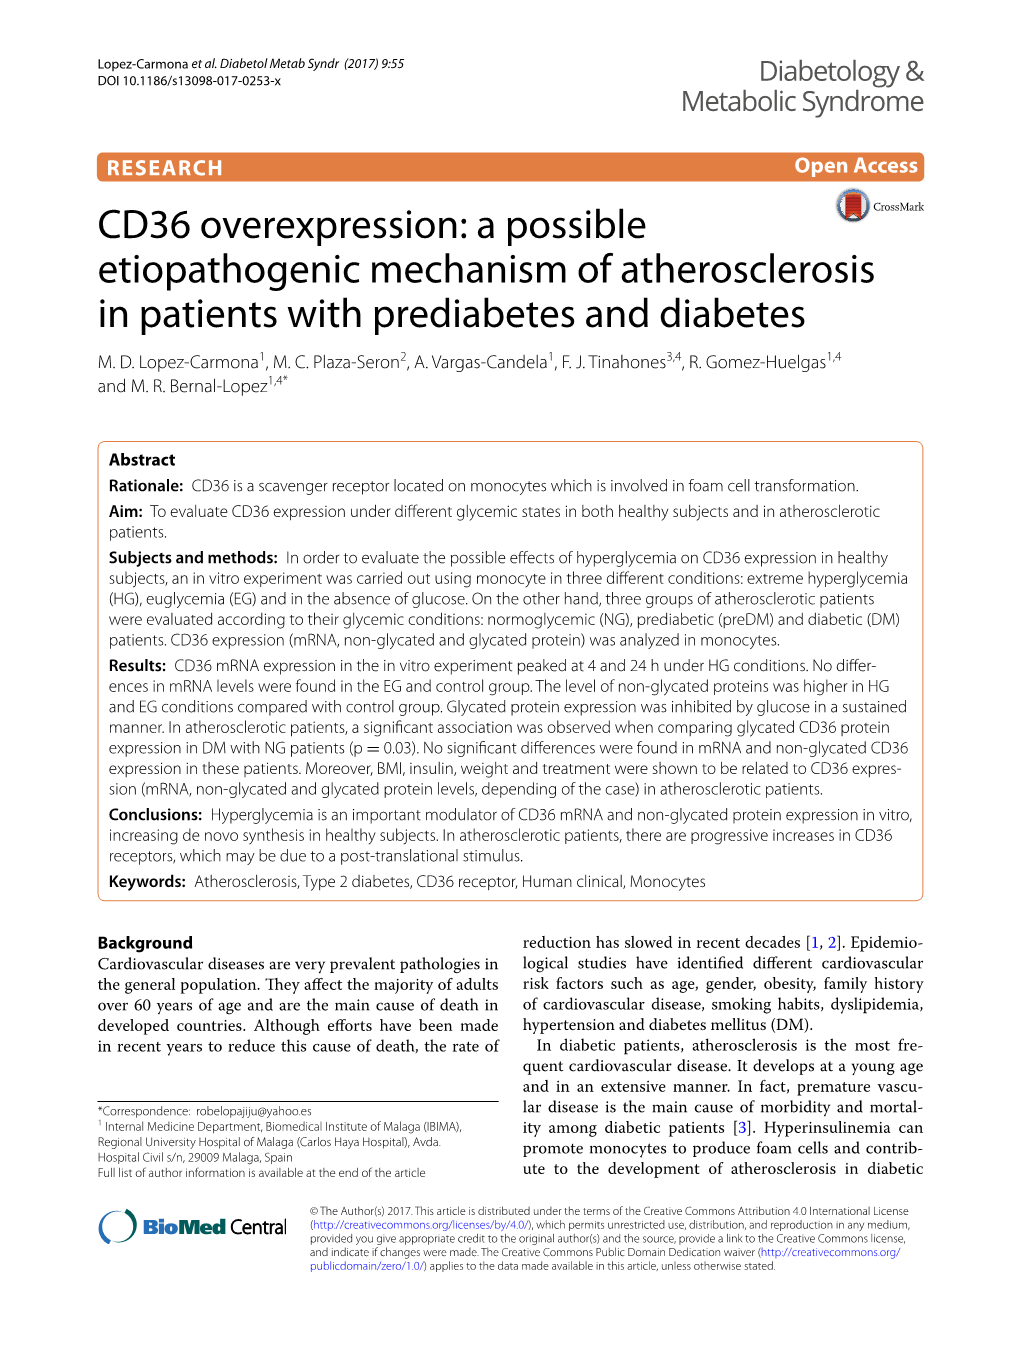 CD36 Overexpression: a Possible Etiopathogenic Mechanism of Atherosclerosis in Patients with Prediabetes and Diabetes M